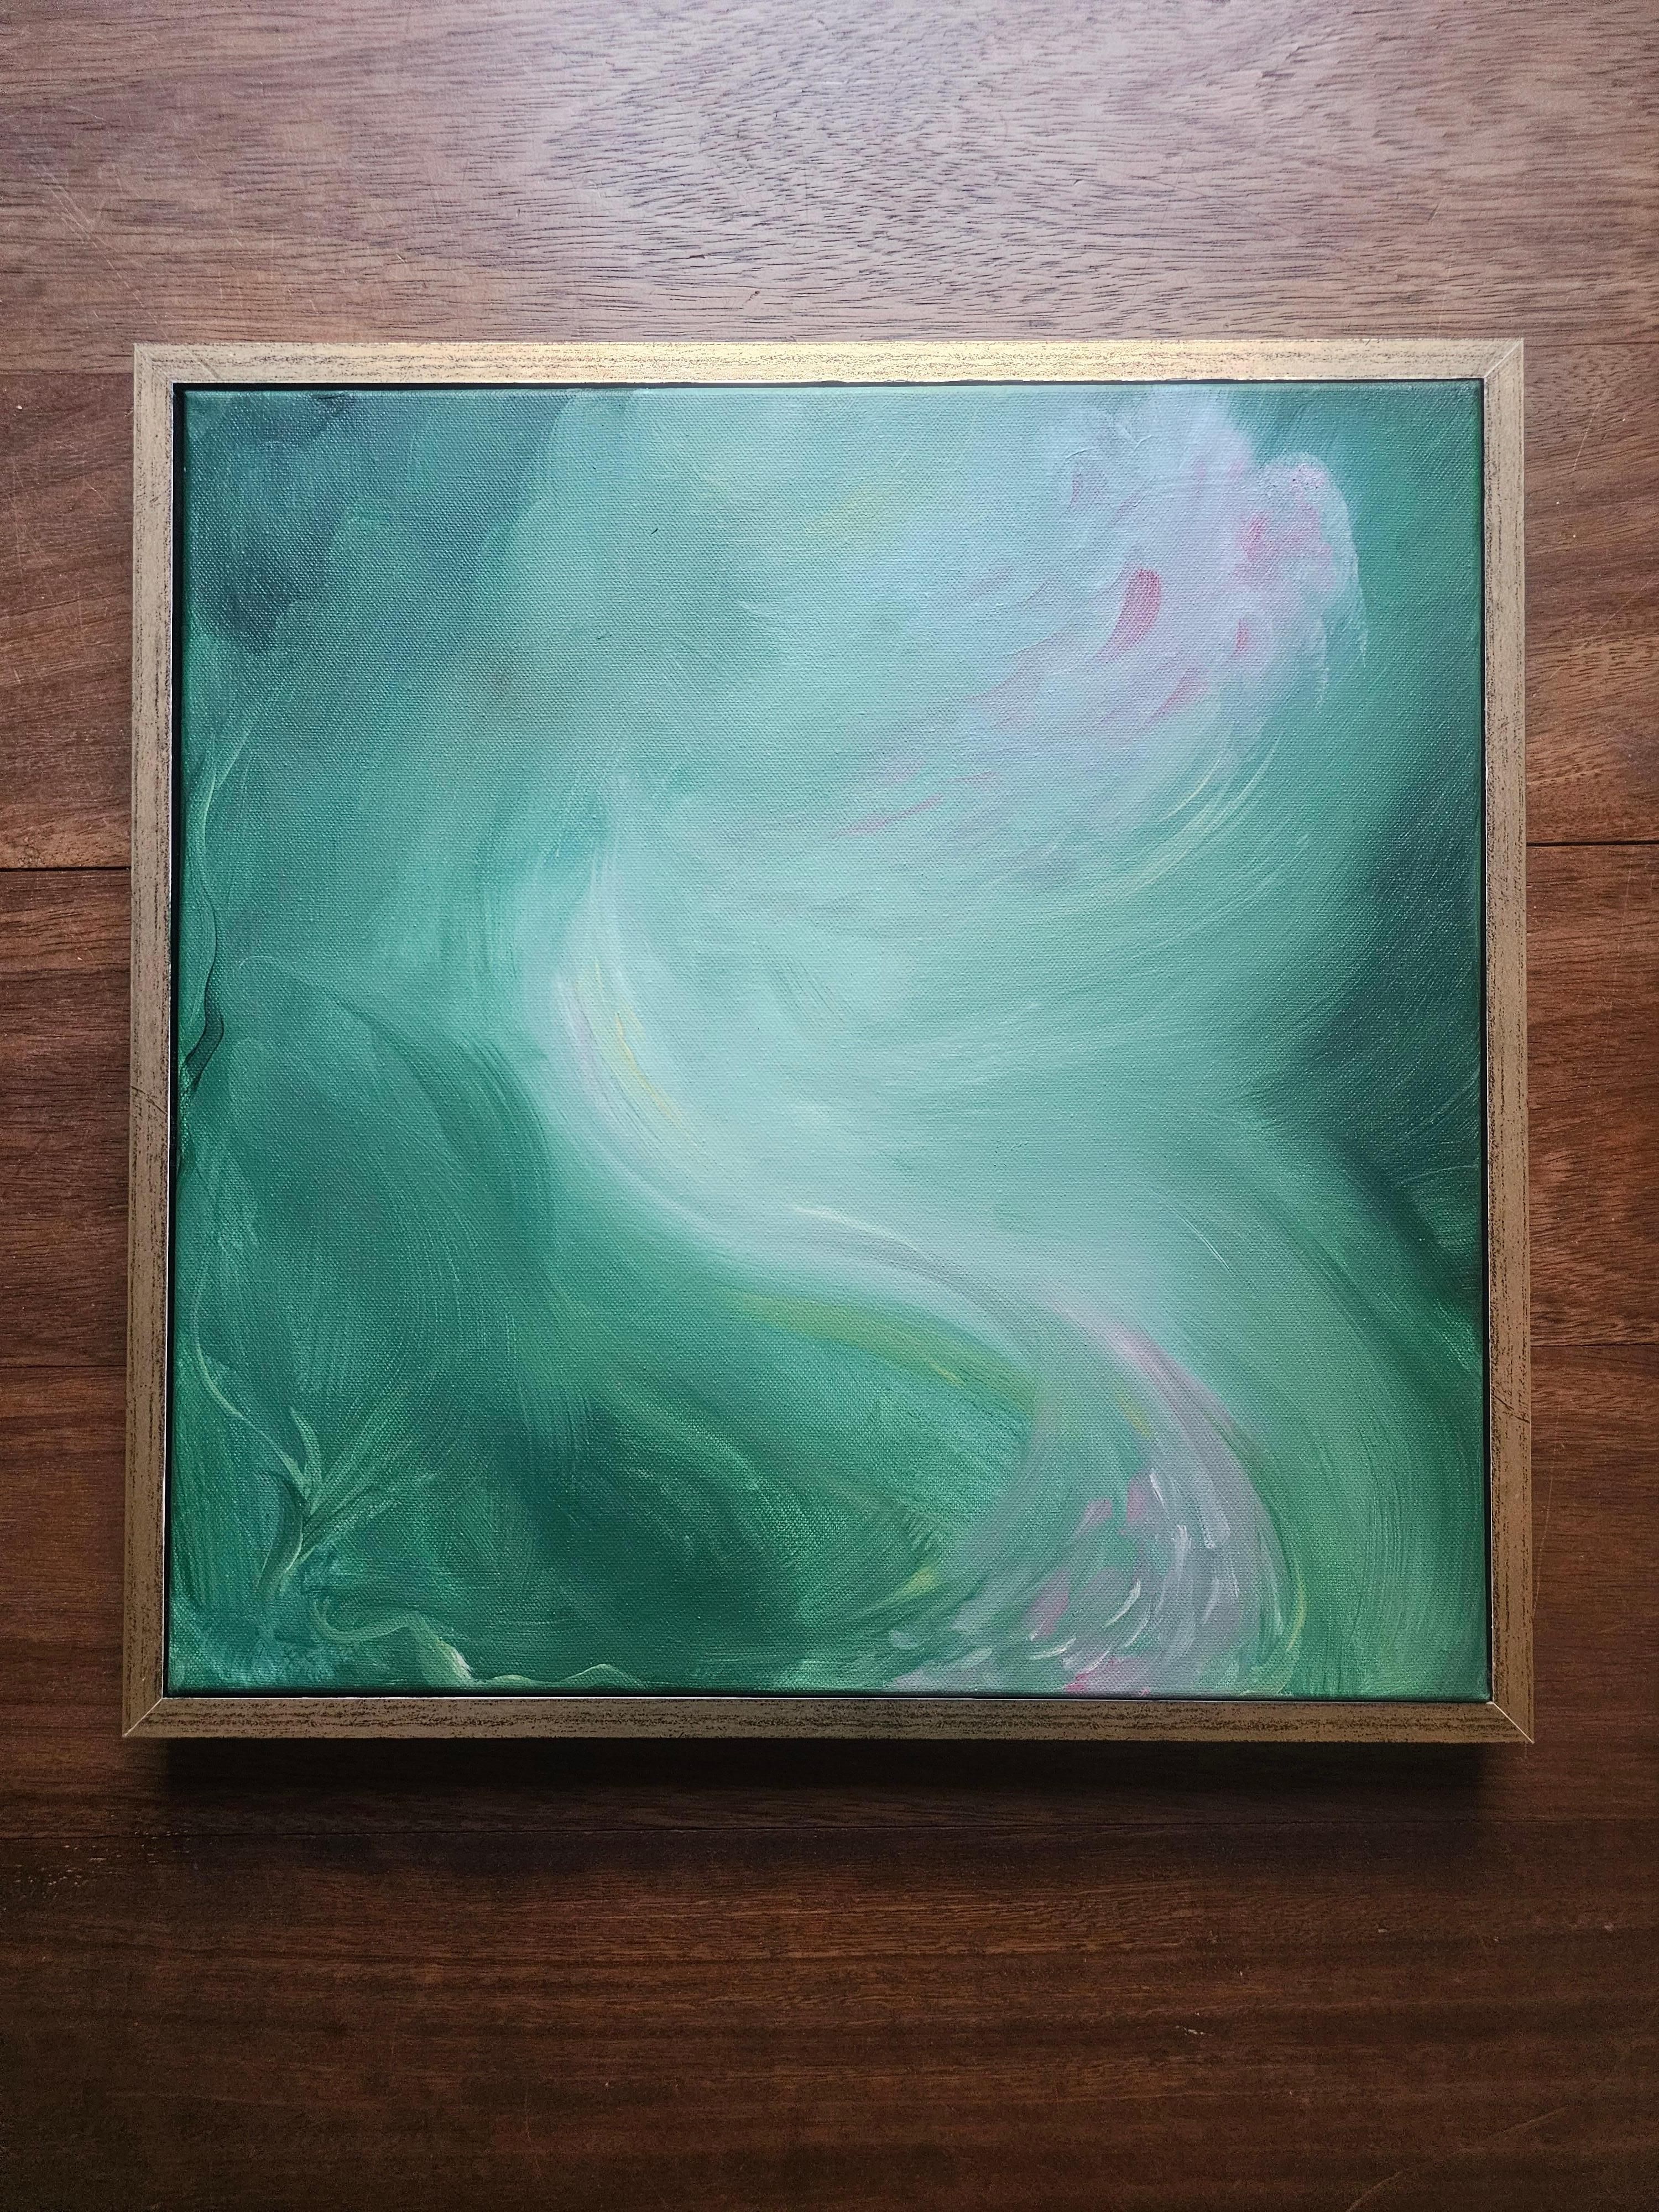 Moth's wing on the forest floor - framed green abstract expressionist painting - Green Abstract Painting by Jennifer L. Baker